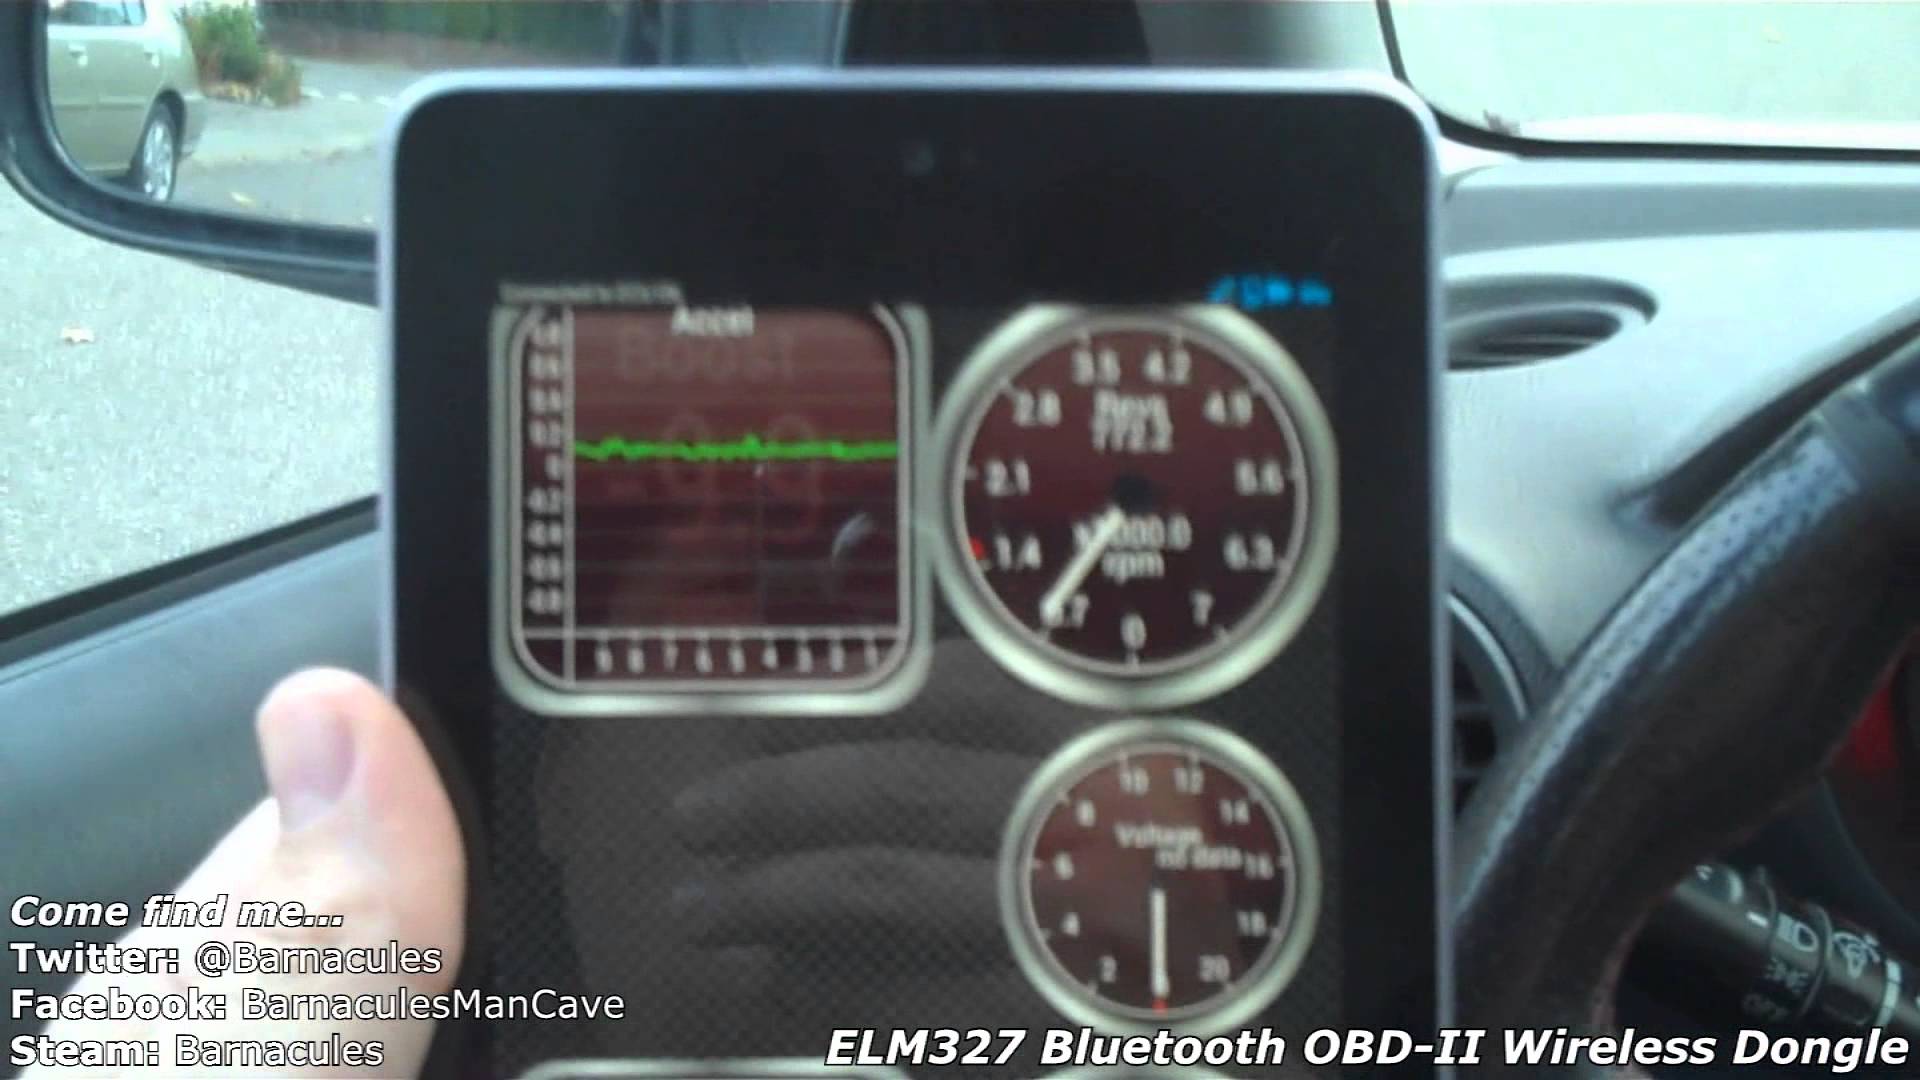 Review of Bluetooth OBD2 Wireless Transceiver Diagnostic Dongle - Check ...